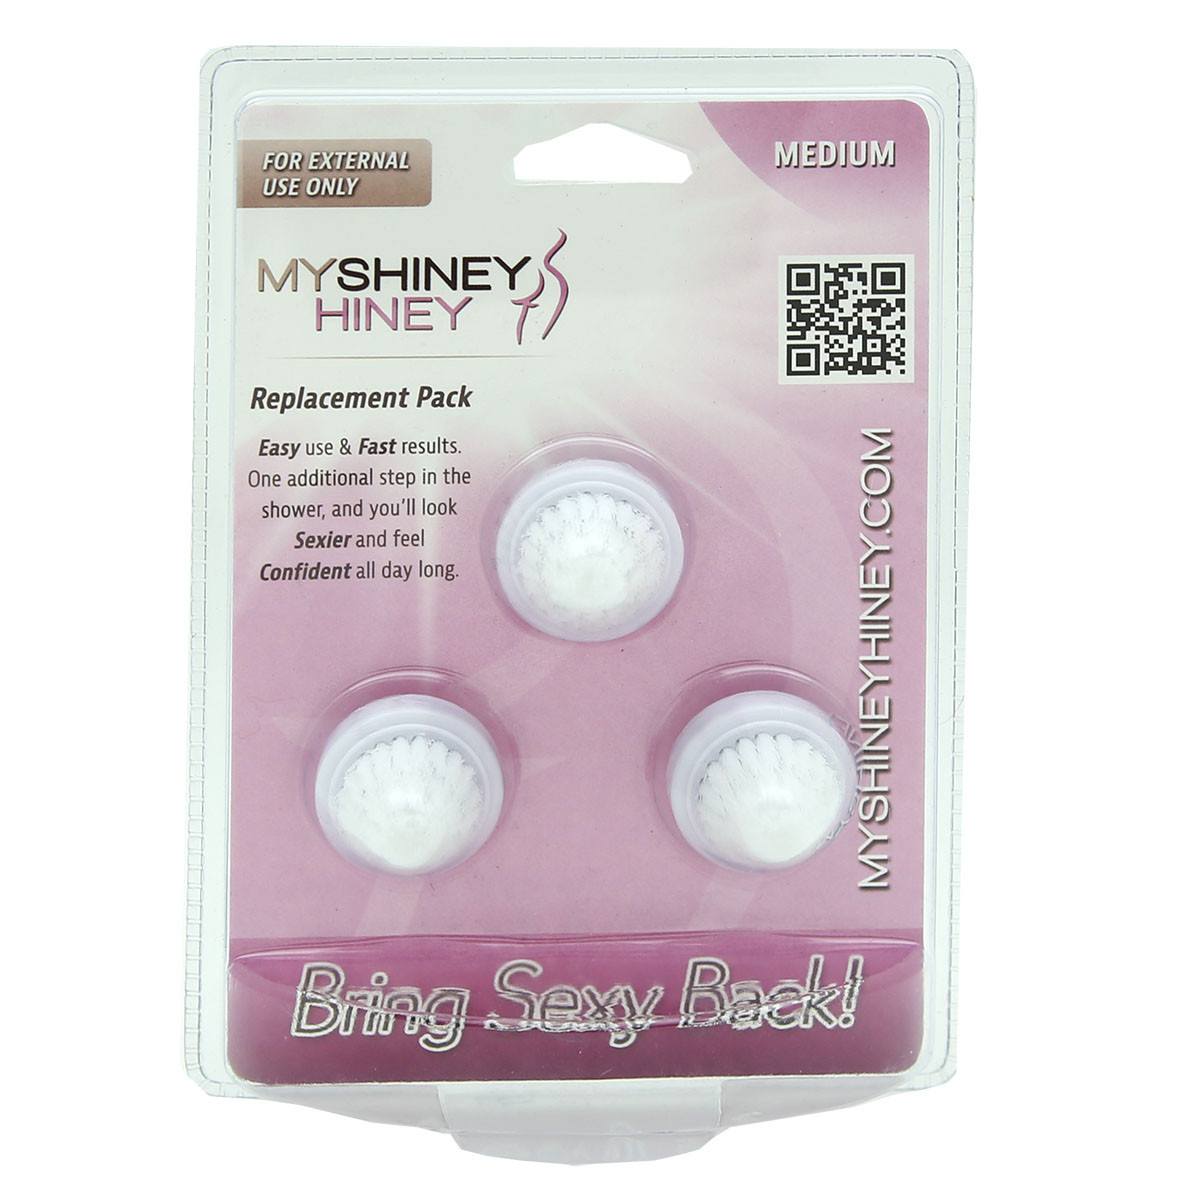 Replacement Heads - My Shiney Hiney Personal Cleansing Kit Medium Replacement Heads (3pk)